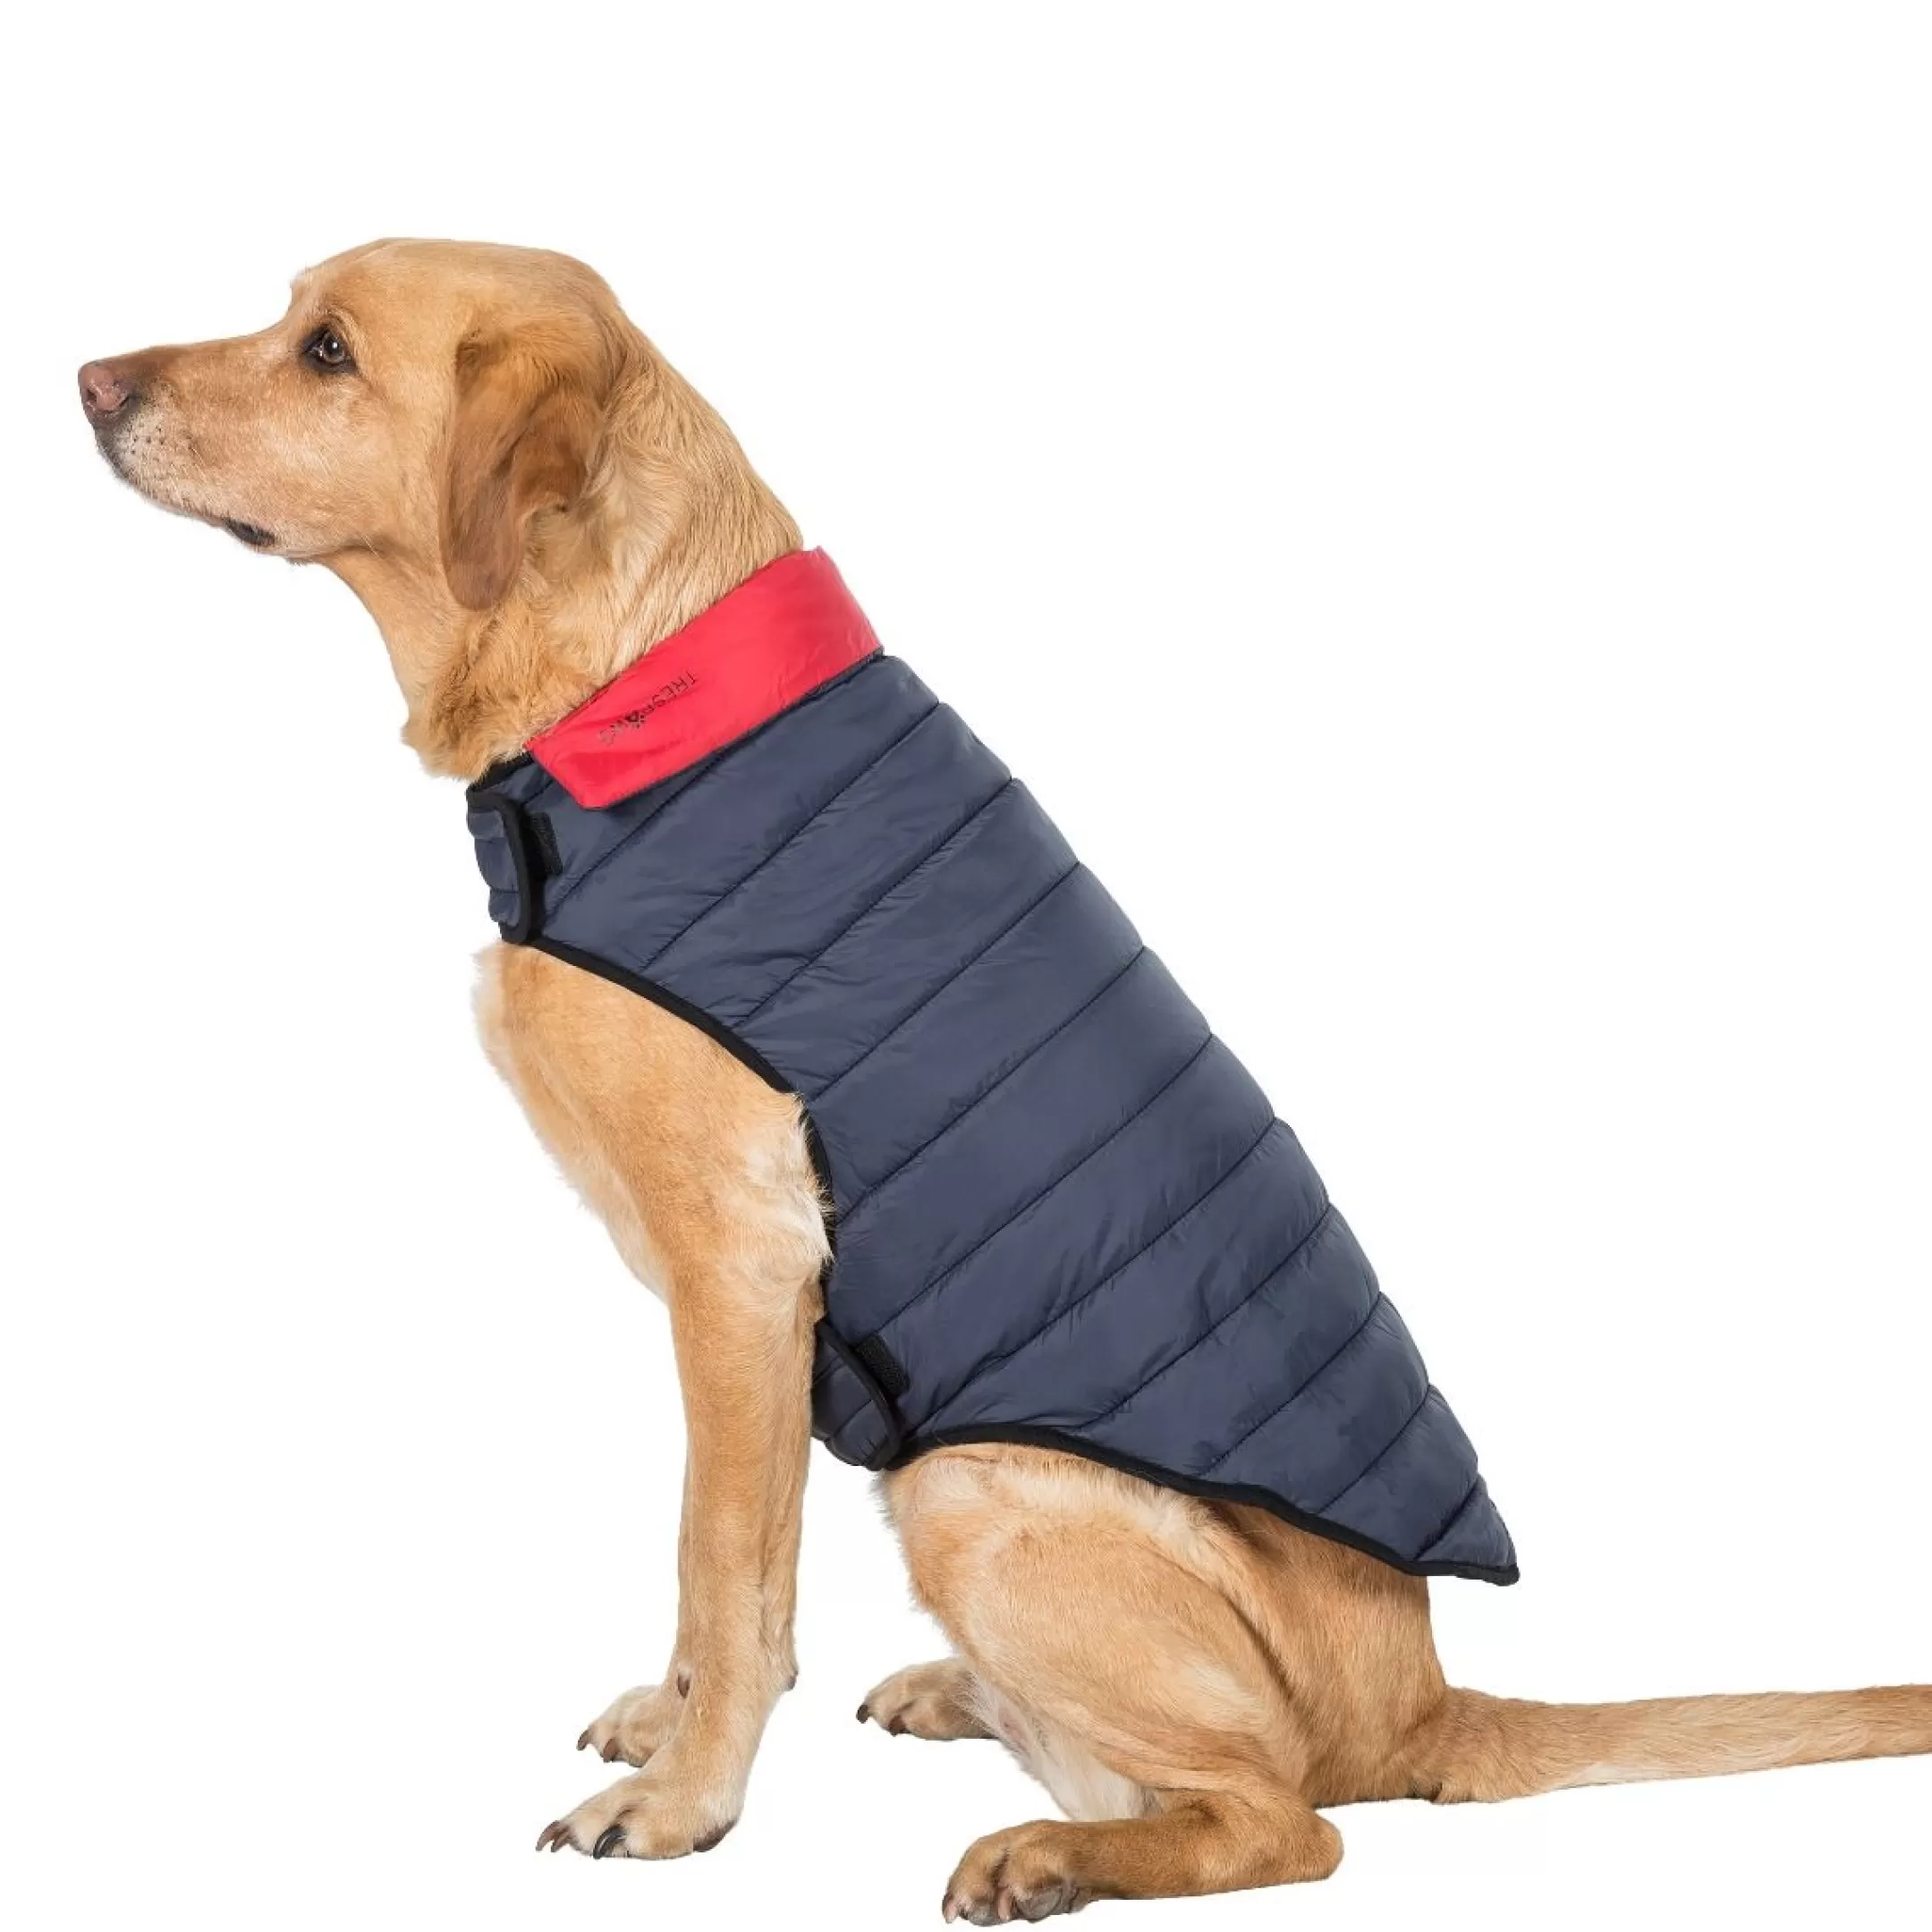 Trespaws Large Quilted Reversible Packaway Dog Jacket in Flint Kimmi | Trespass Fashion